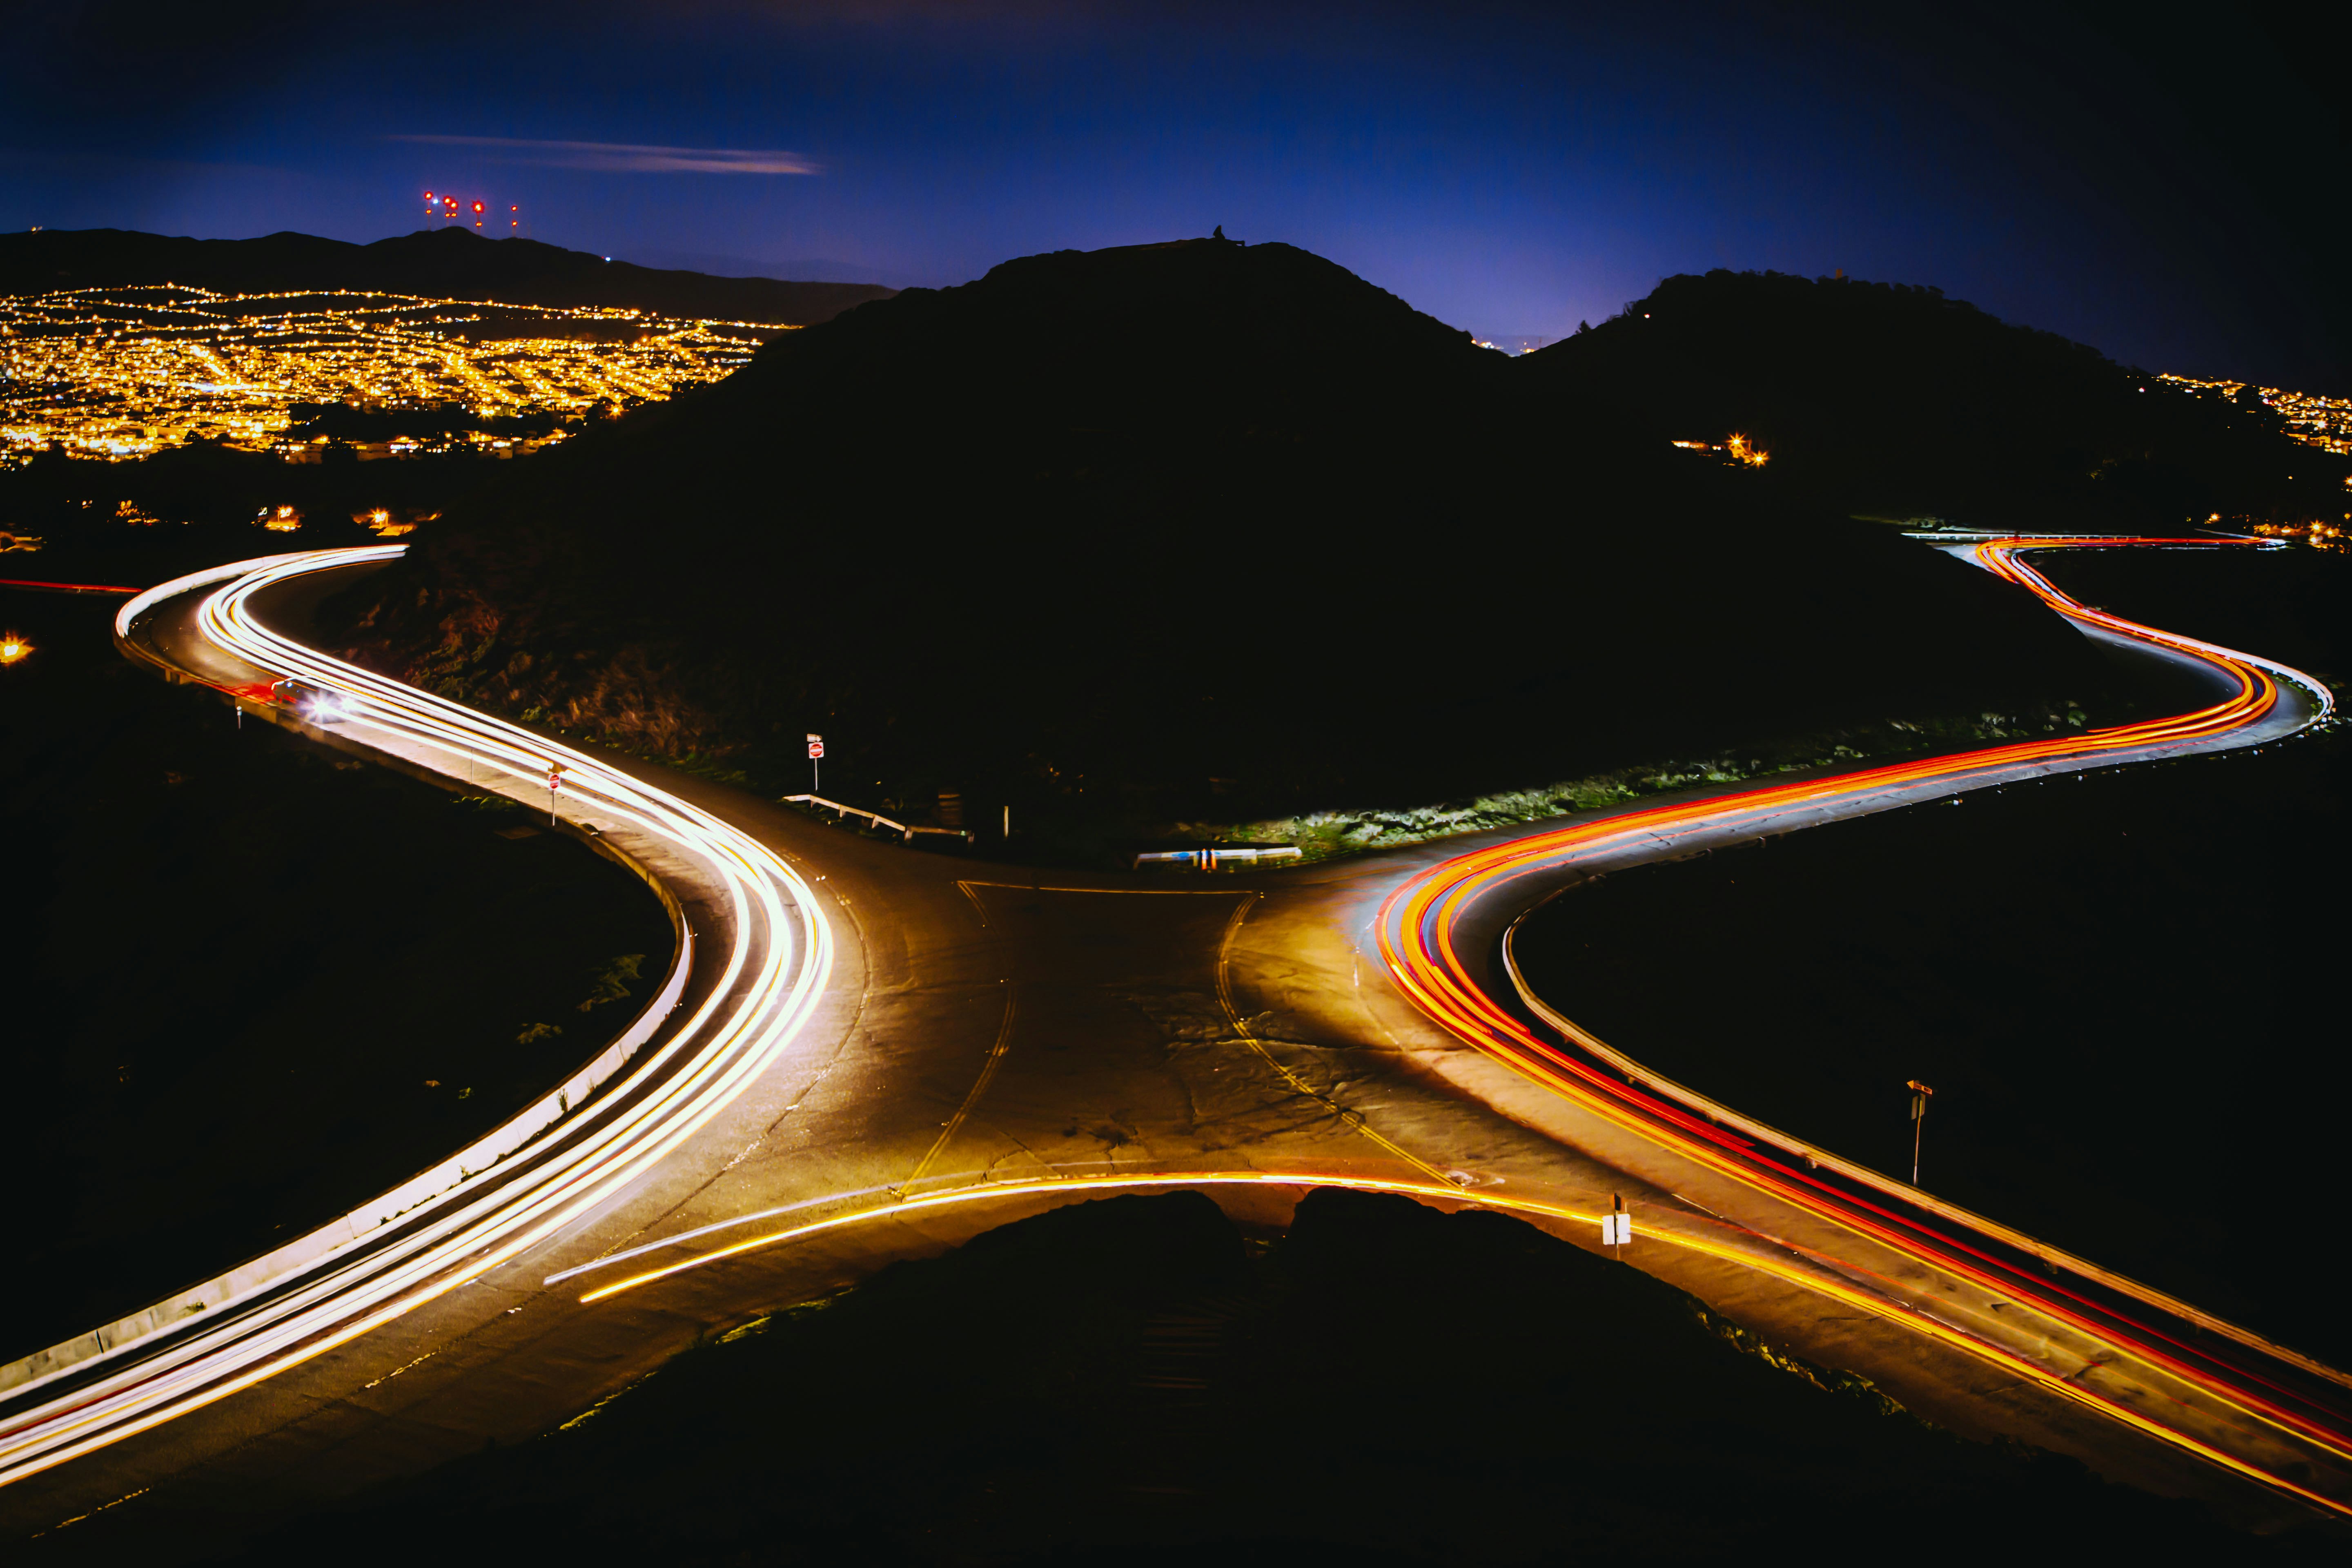 aerial view photography of cross road near mountain during nighttime